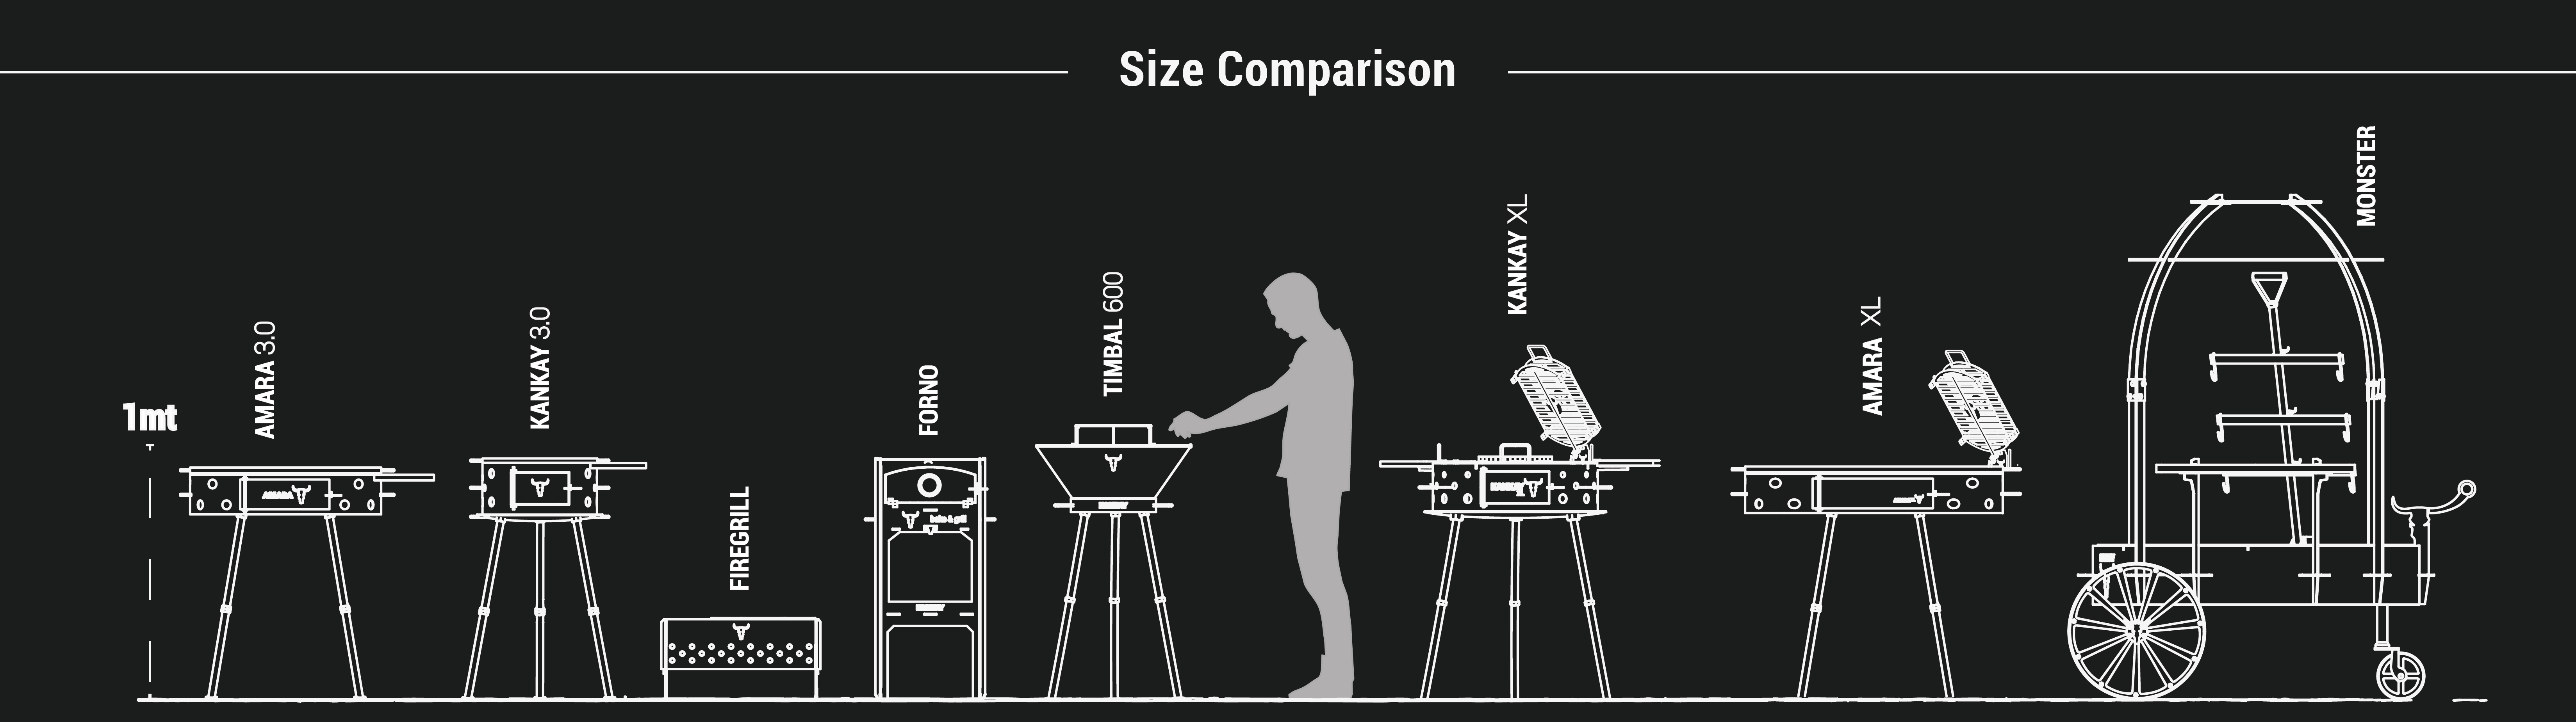 Kankay: Grill size comparison banner